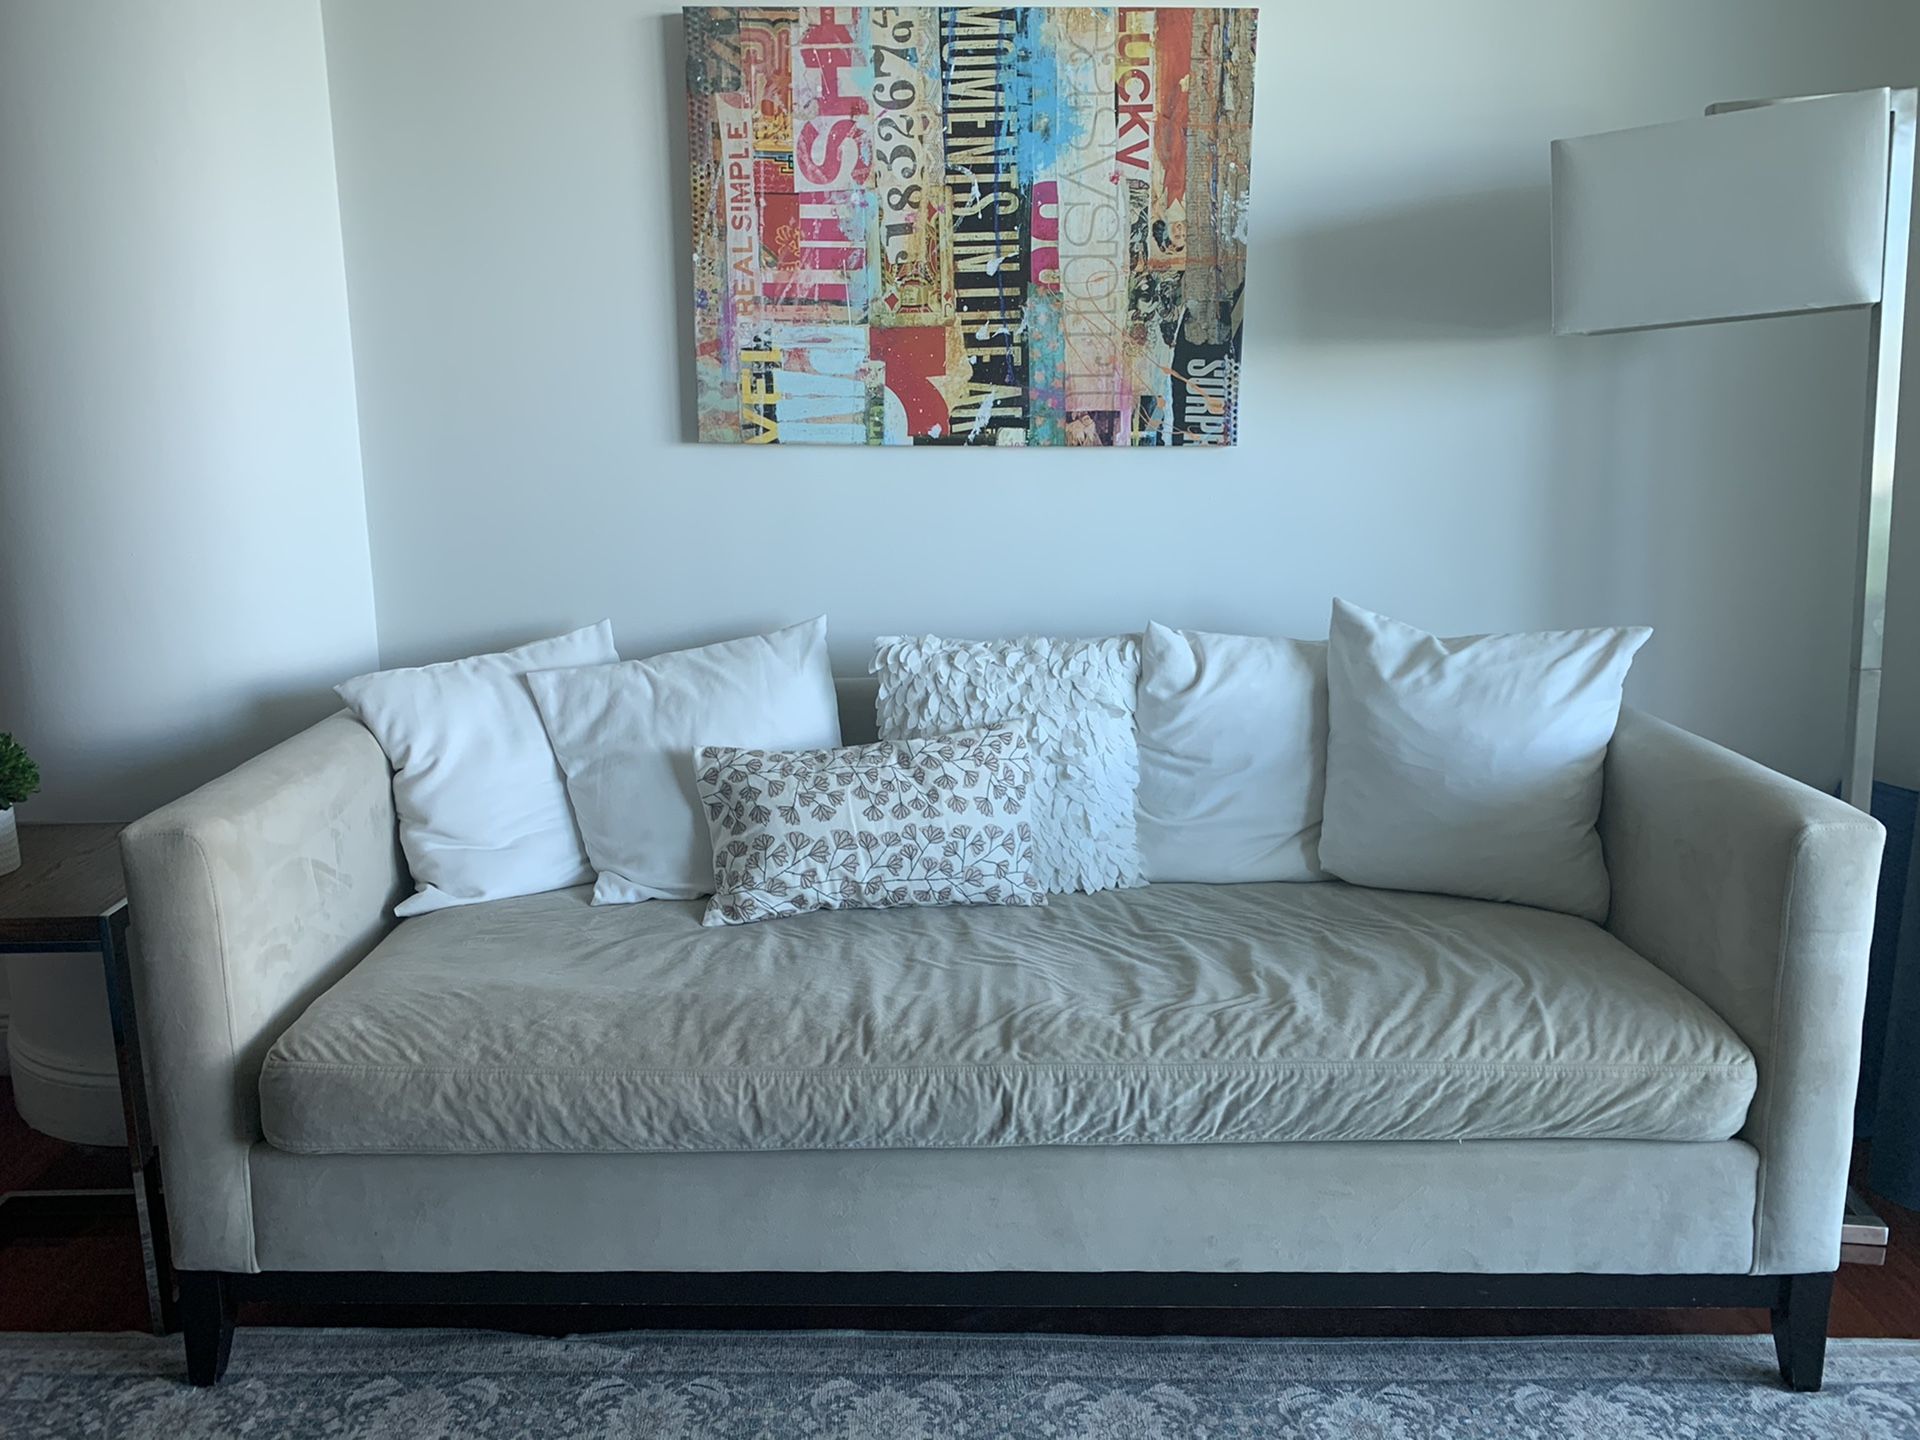 Free West Elm couch